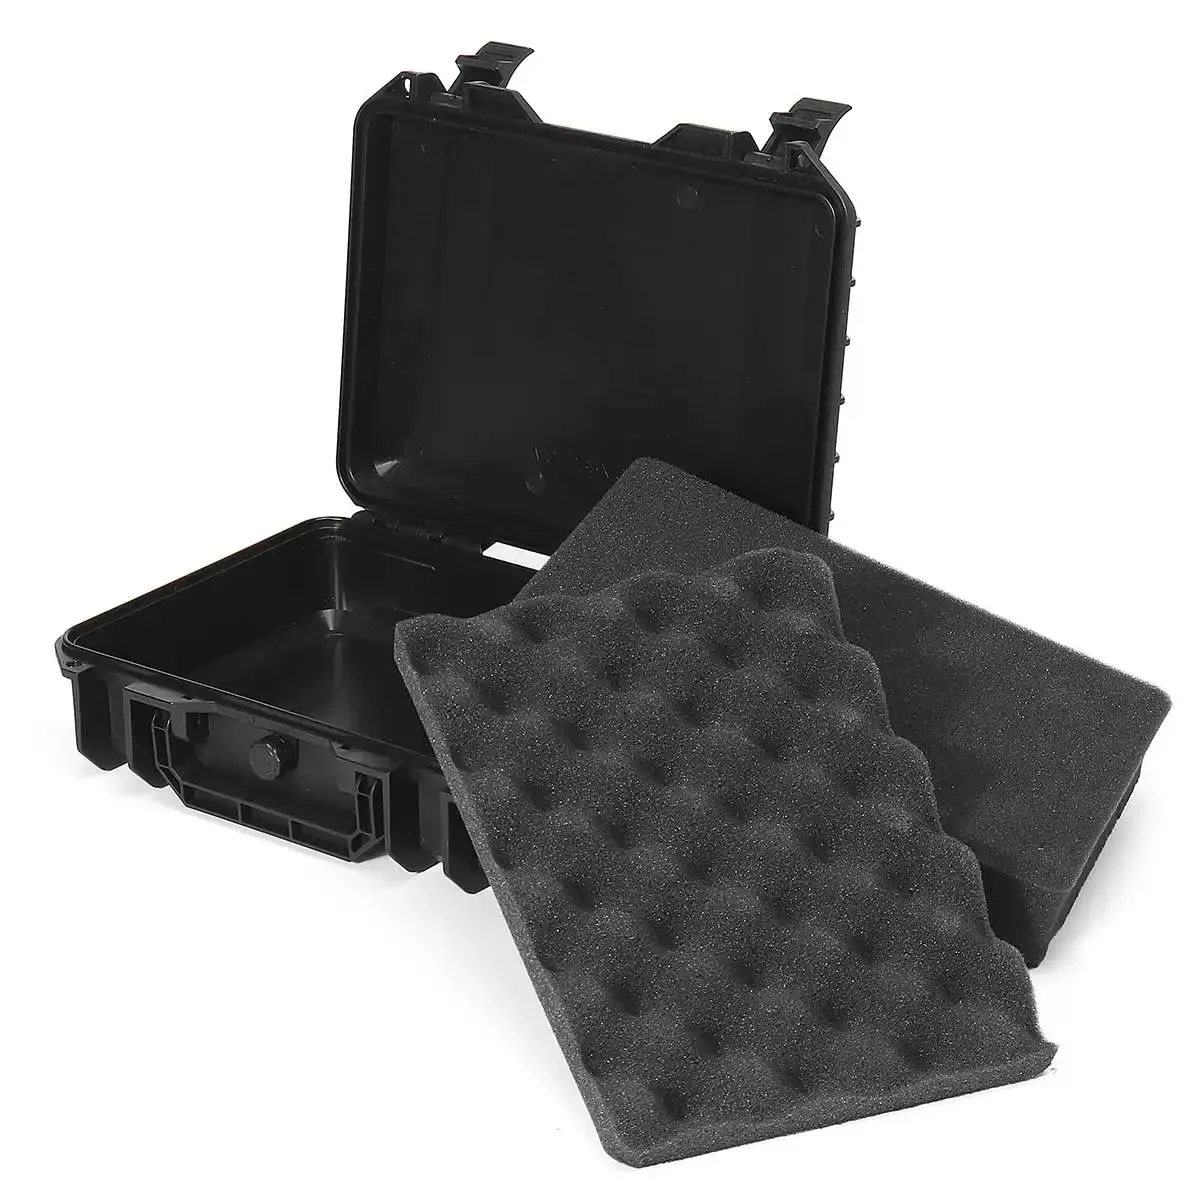 equipment-organizer-waterproof-carry-bag-protector-case-storage-sponge-hard-safety-kits-with-tool-box-hand